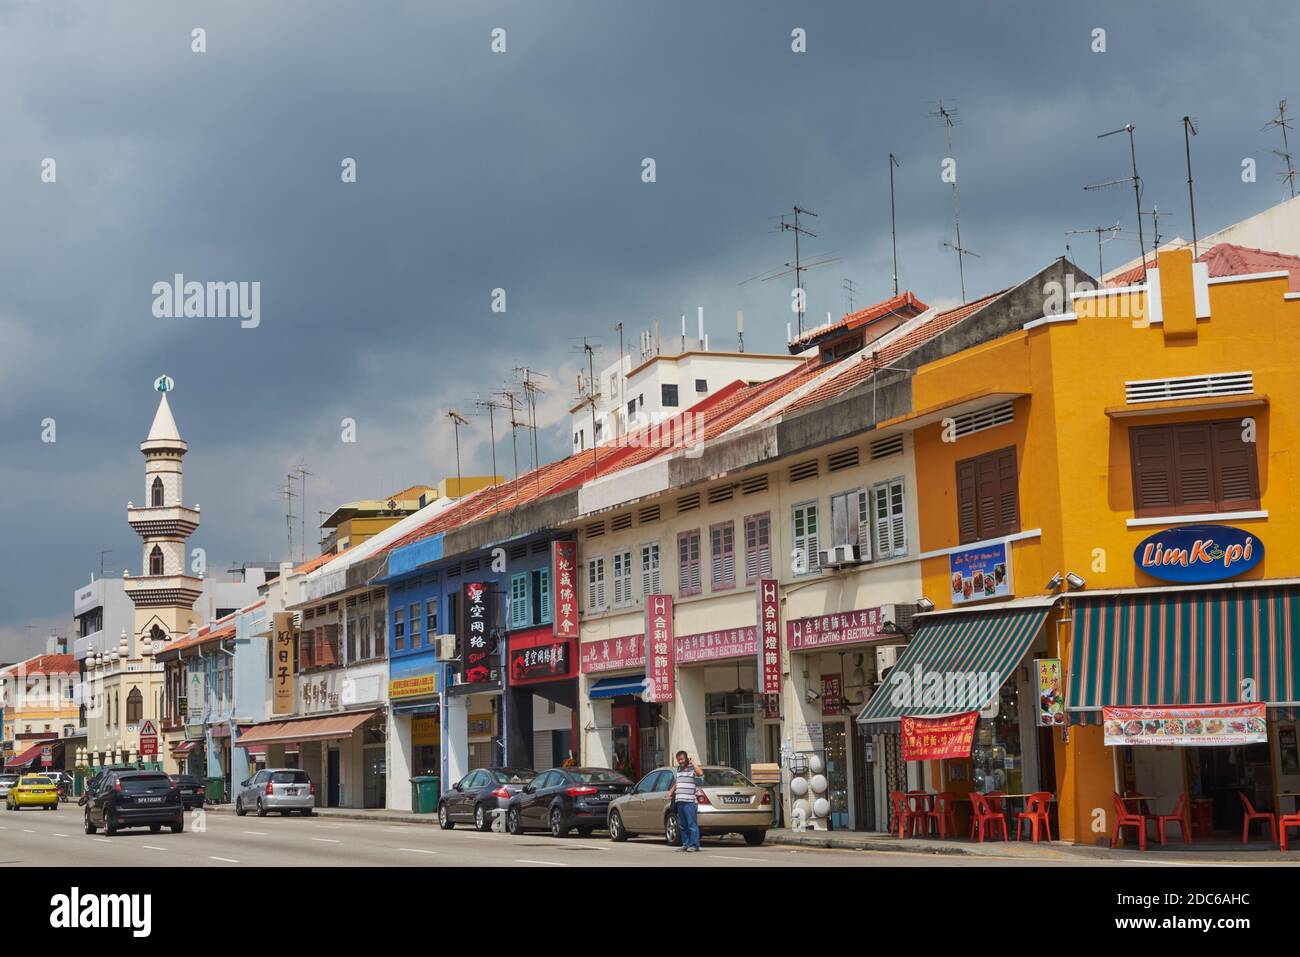 Rain clouds over Geylang Road and the Khadijah Mosque (Masjid Khadijah) in Geylang, Singapore, traditionally a Muslim / Malay quarter of the city Stock Photo